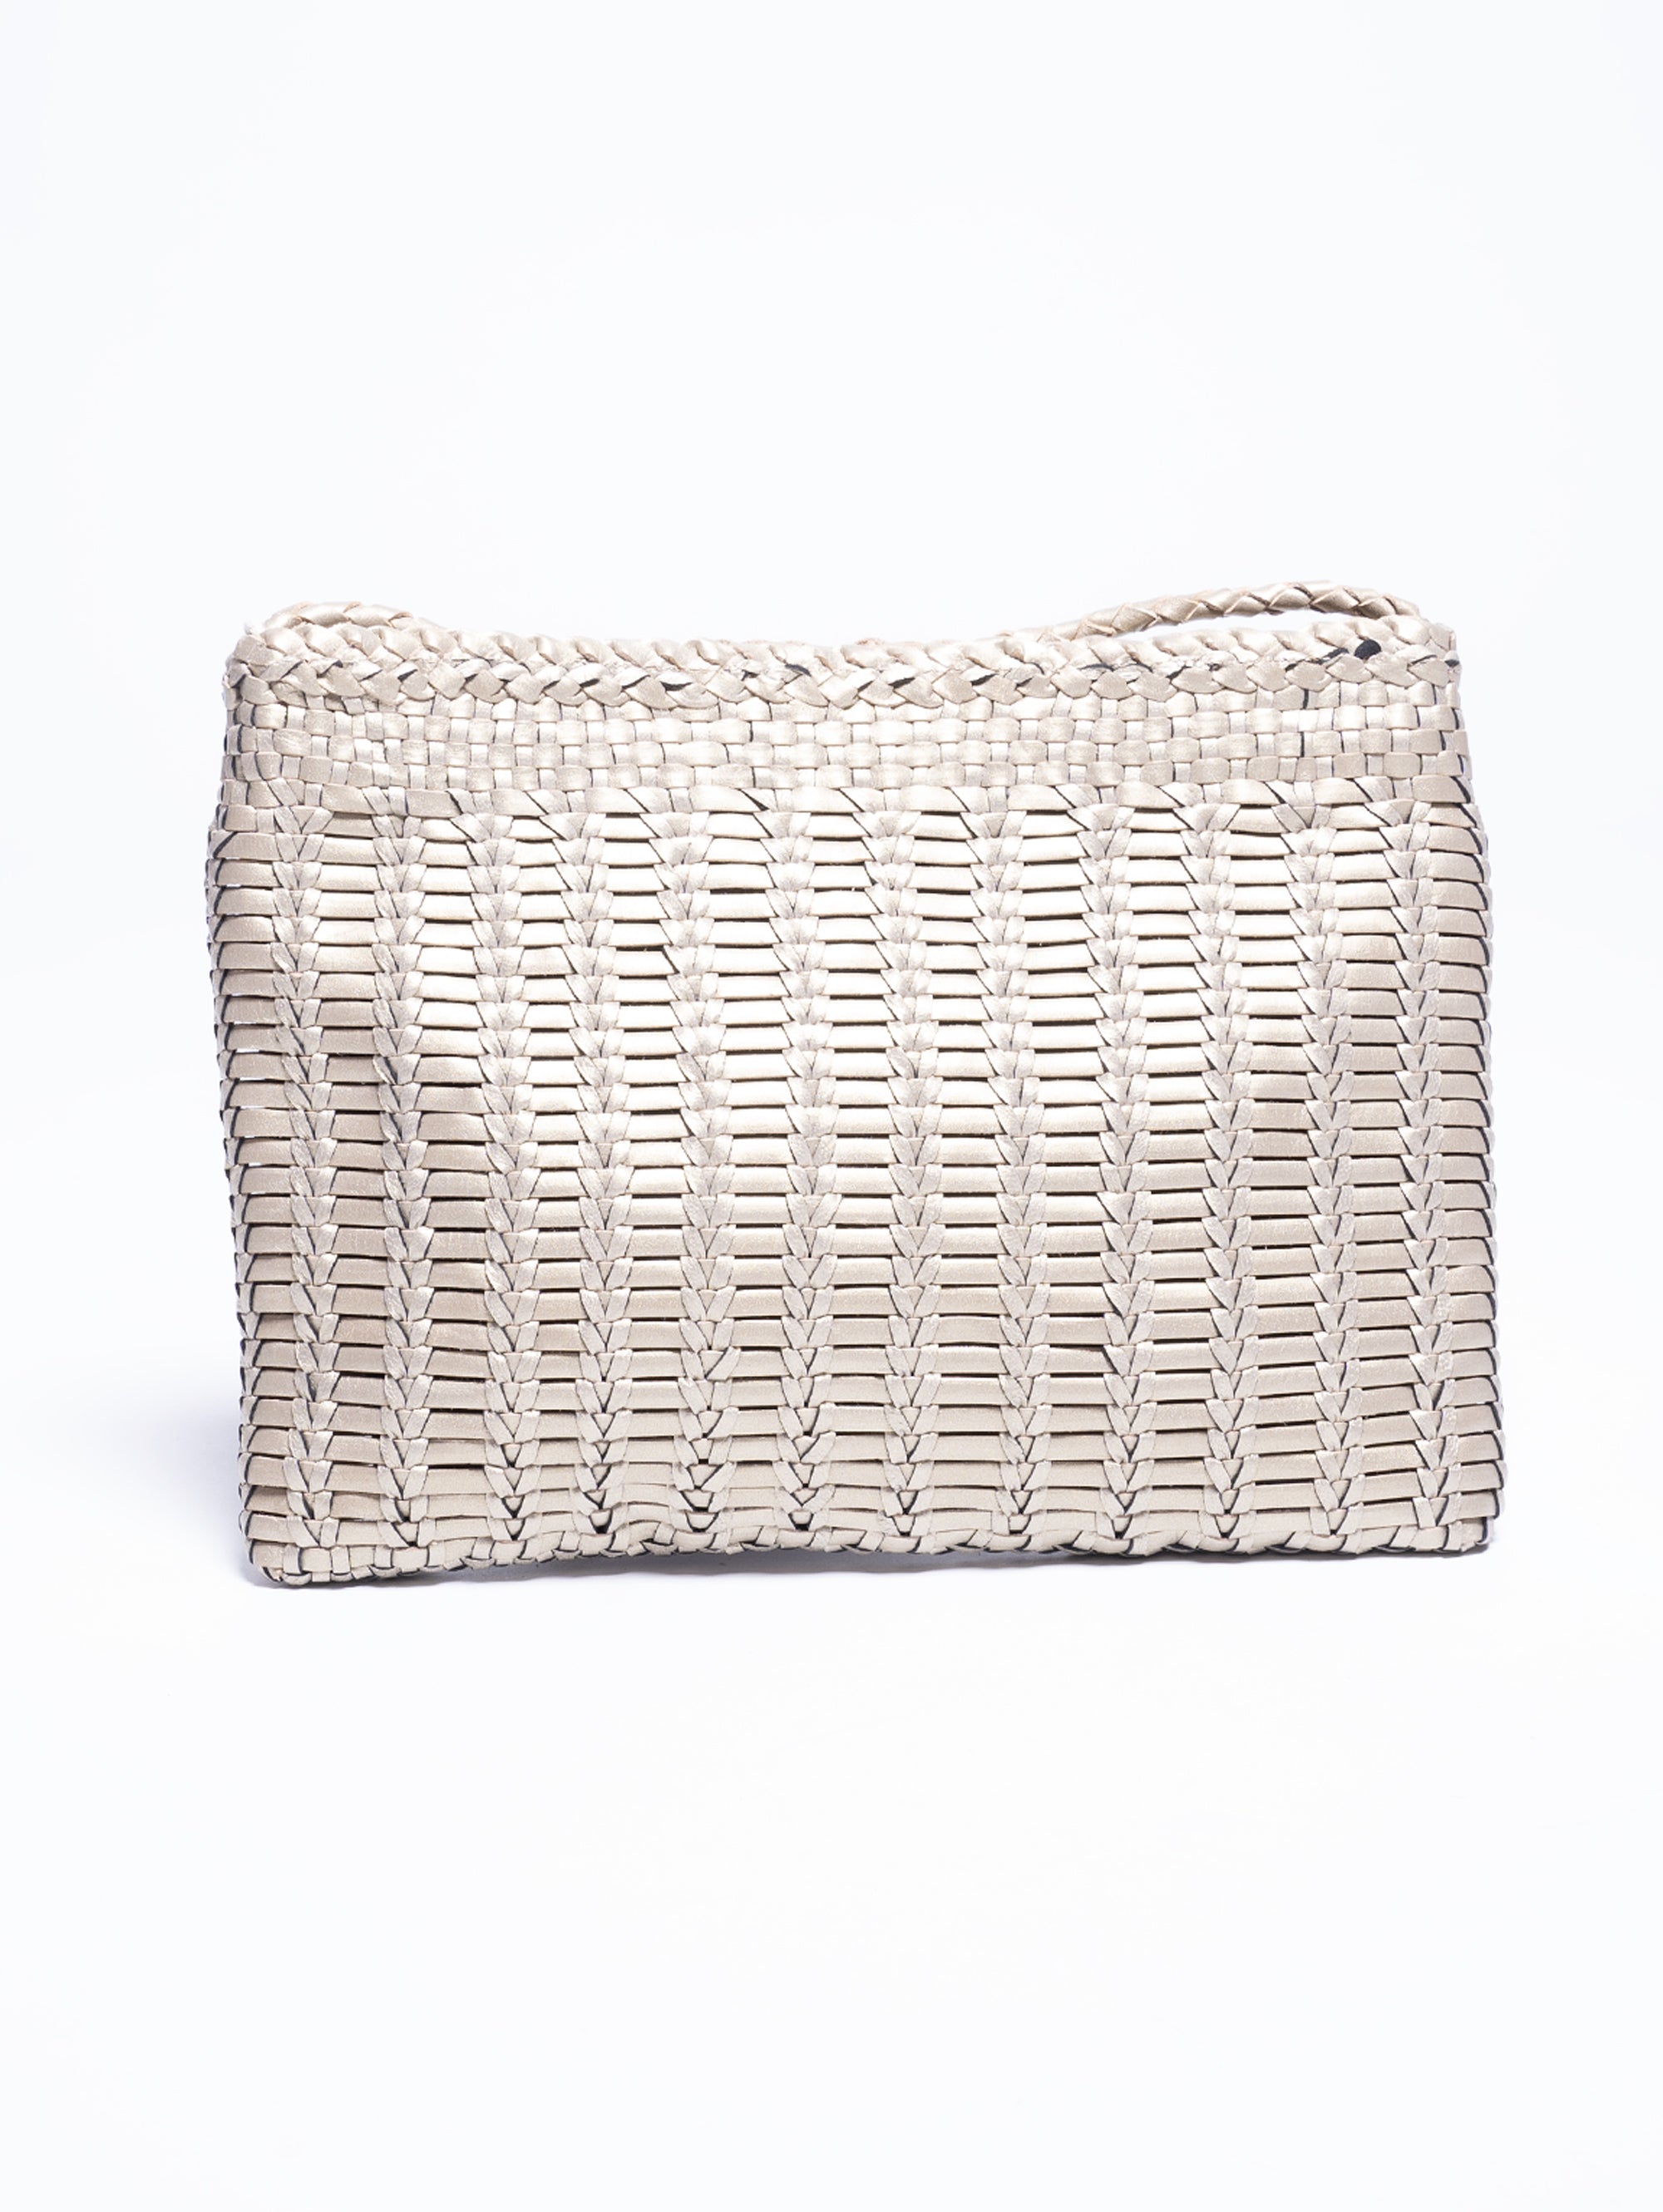 Bali Large Pewter Woven Leather Clutch